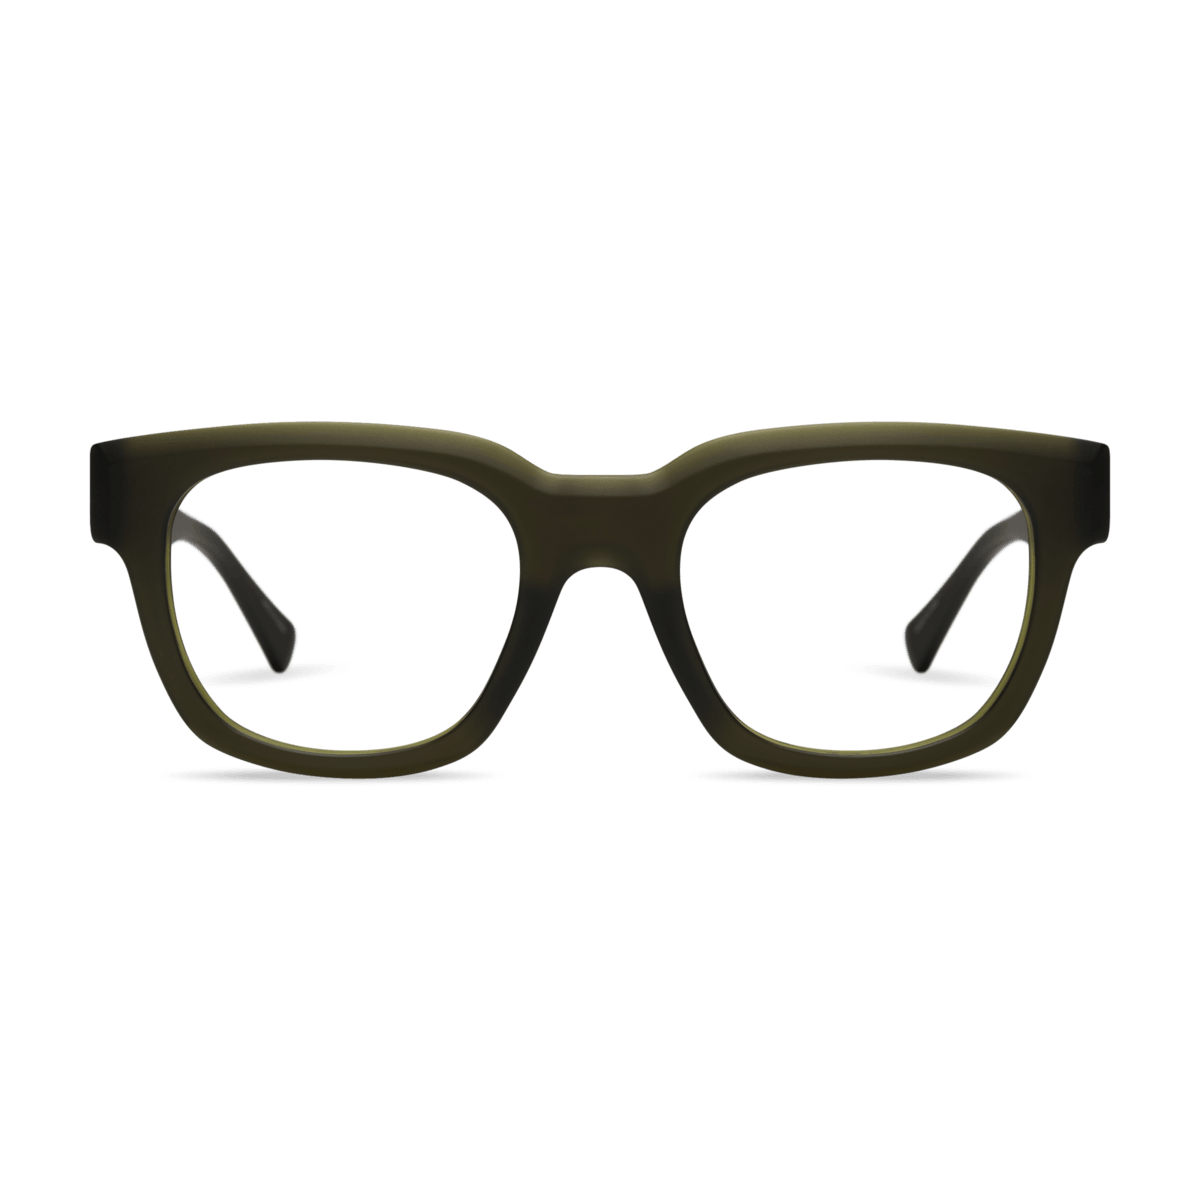 Kaine Readers READING GLASSES LOOK OPTIC Forest Green +1.00 